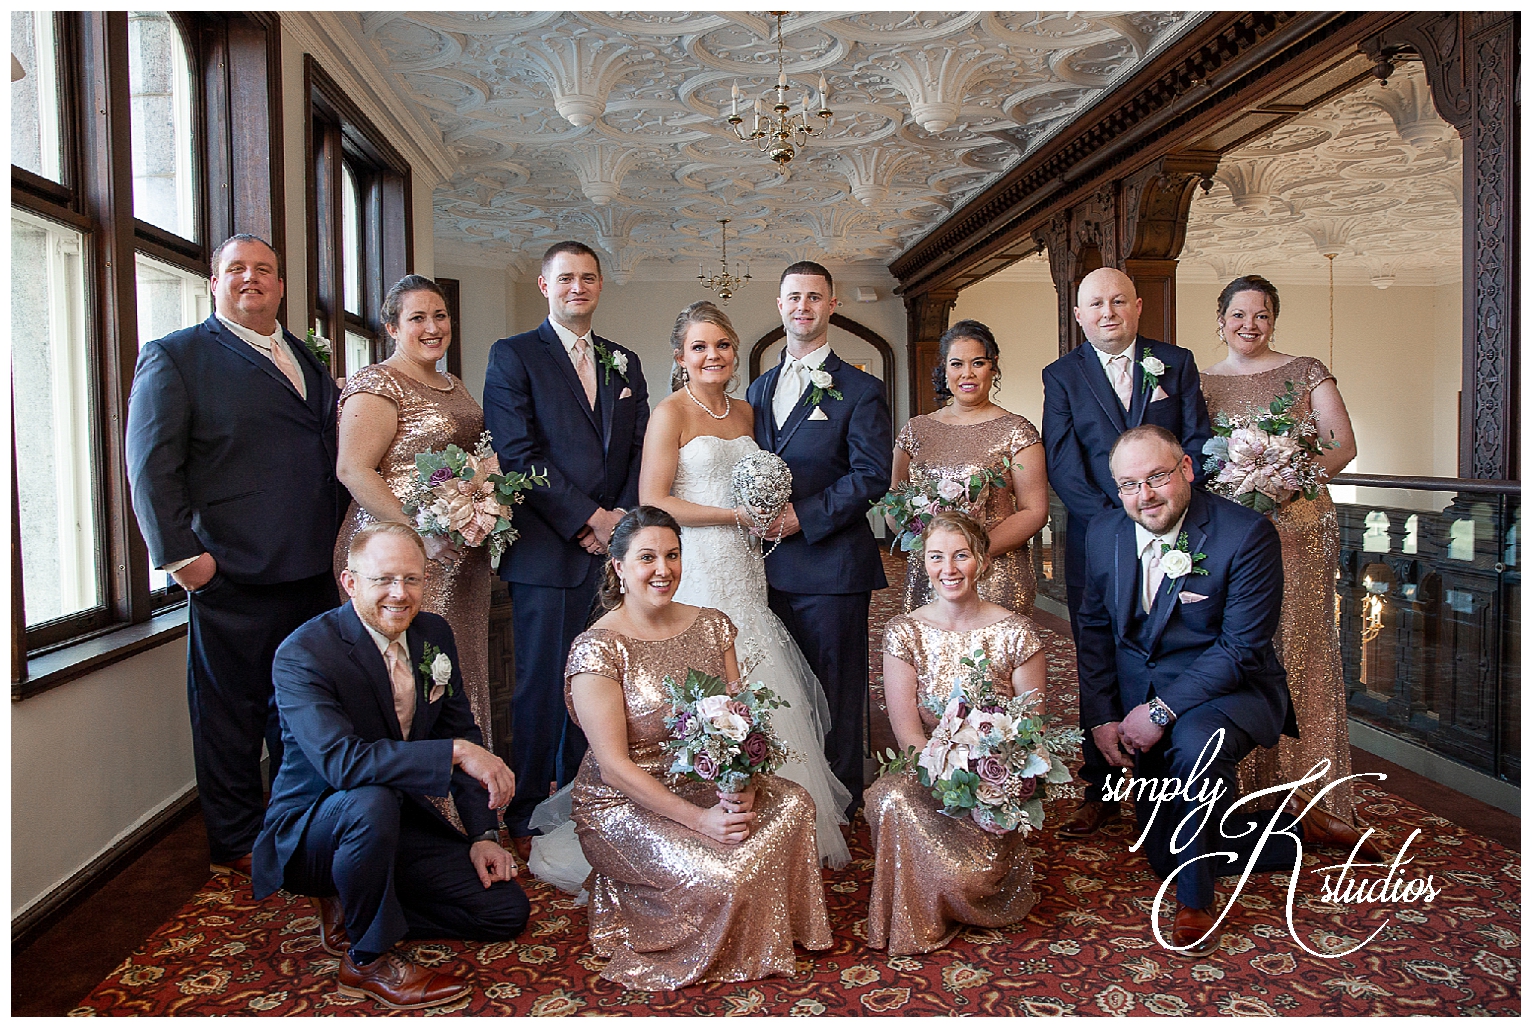 41 Wedding Photos at The Branford House in Connecticut.jpg